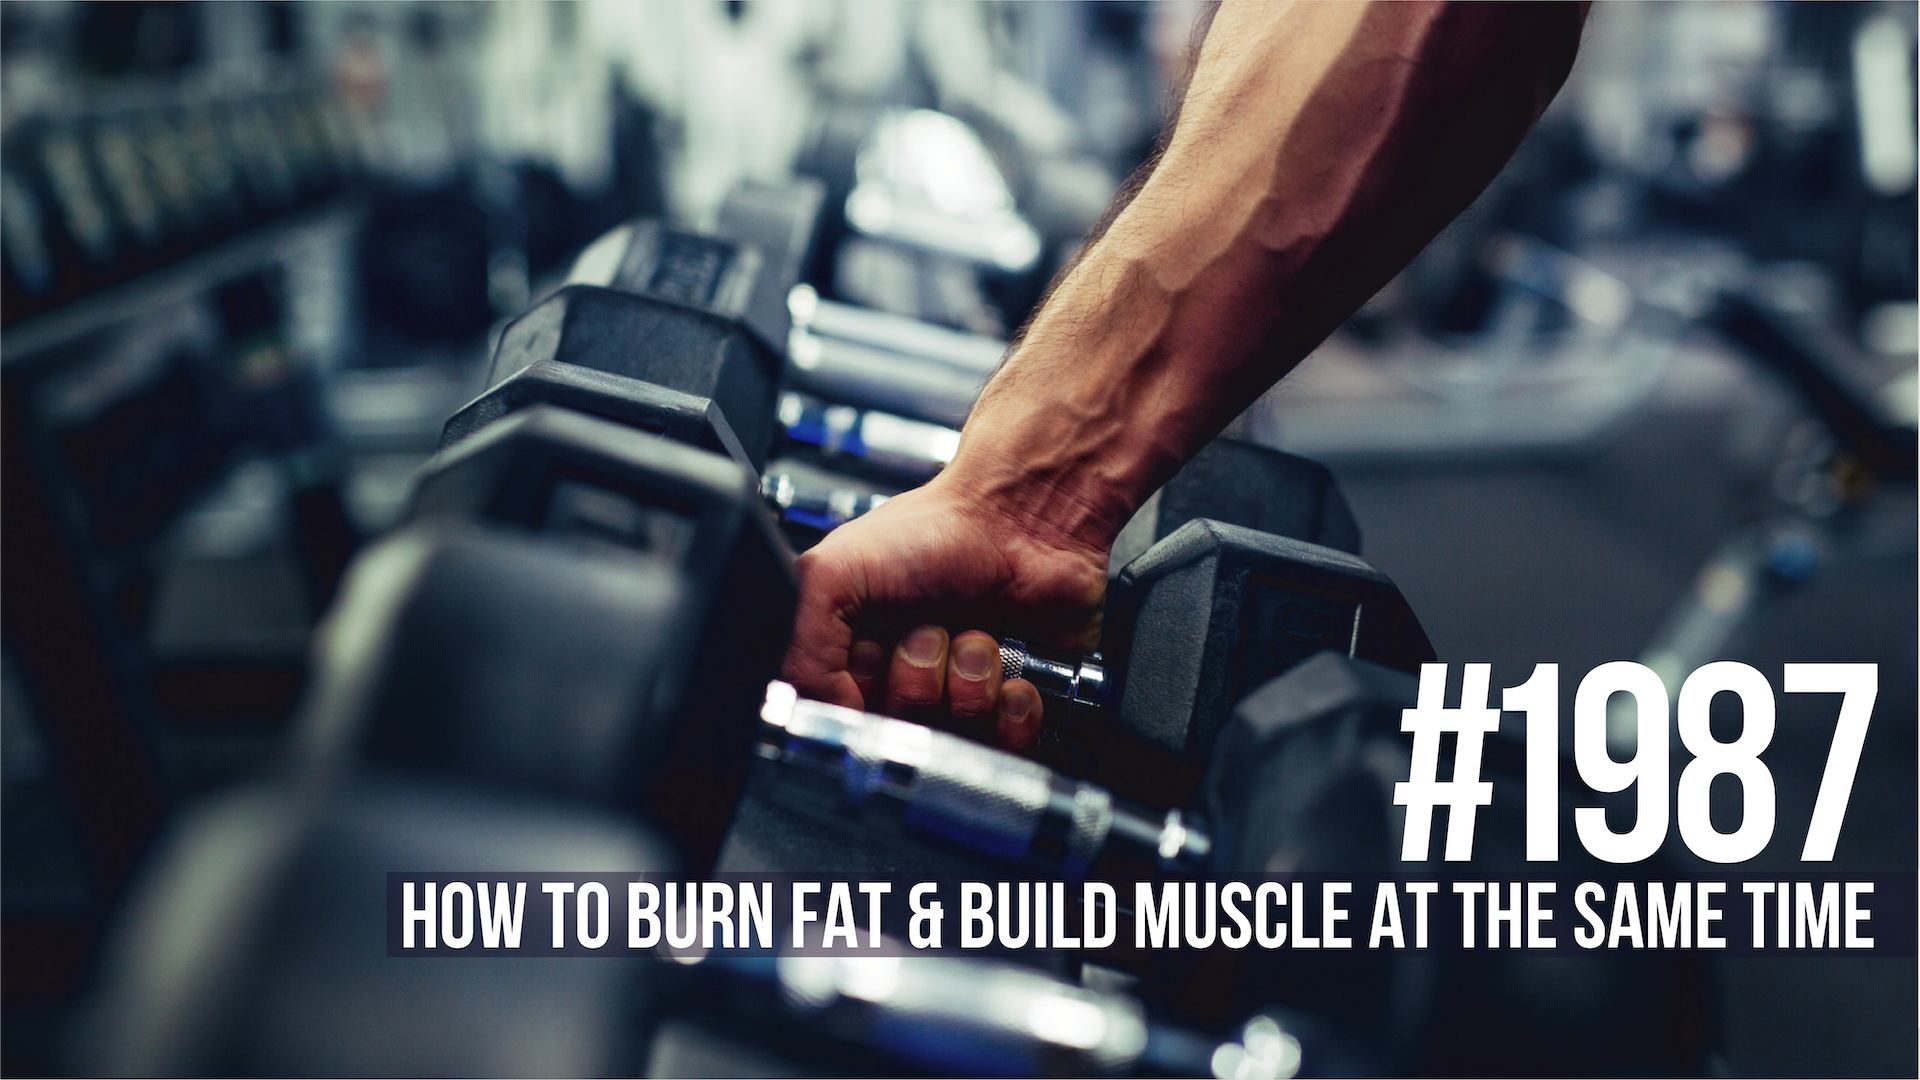 1987: How to Burn Fat & Build Muscle at the Same Time